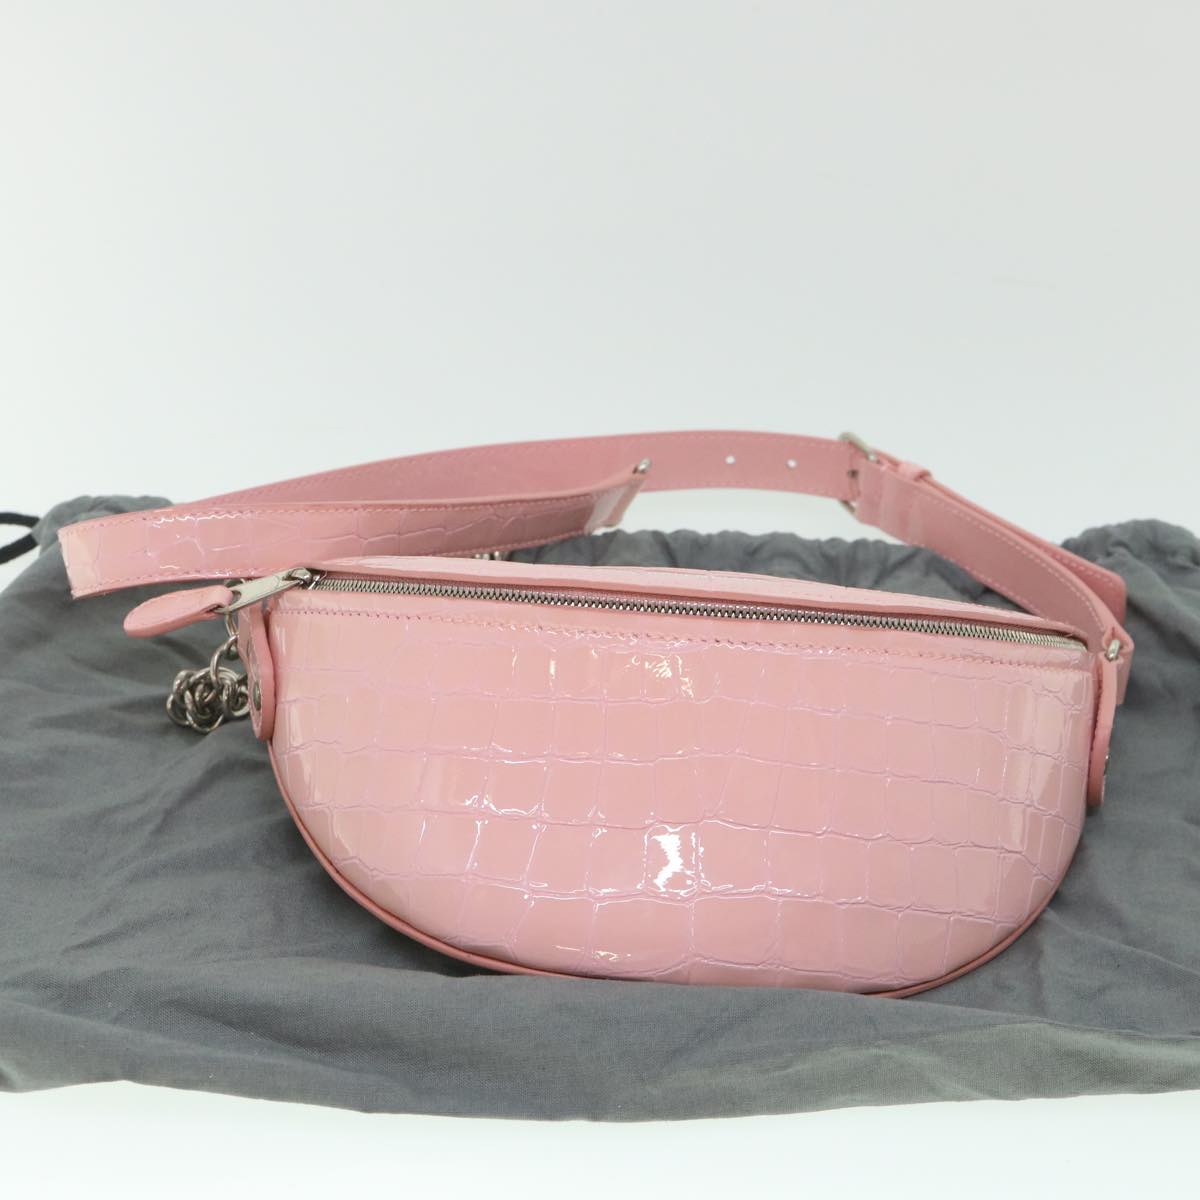 Balenciaga Croco Embossed Body Bag Leather Pink Auth 54195